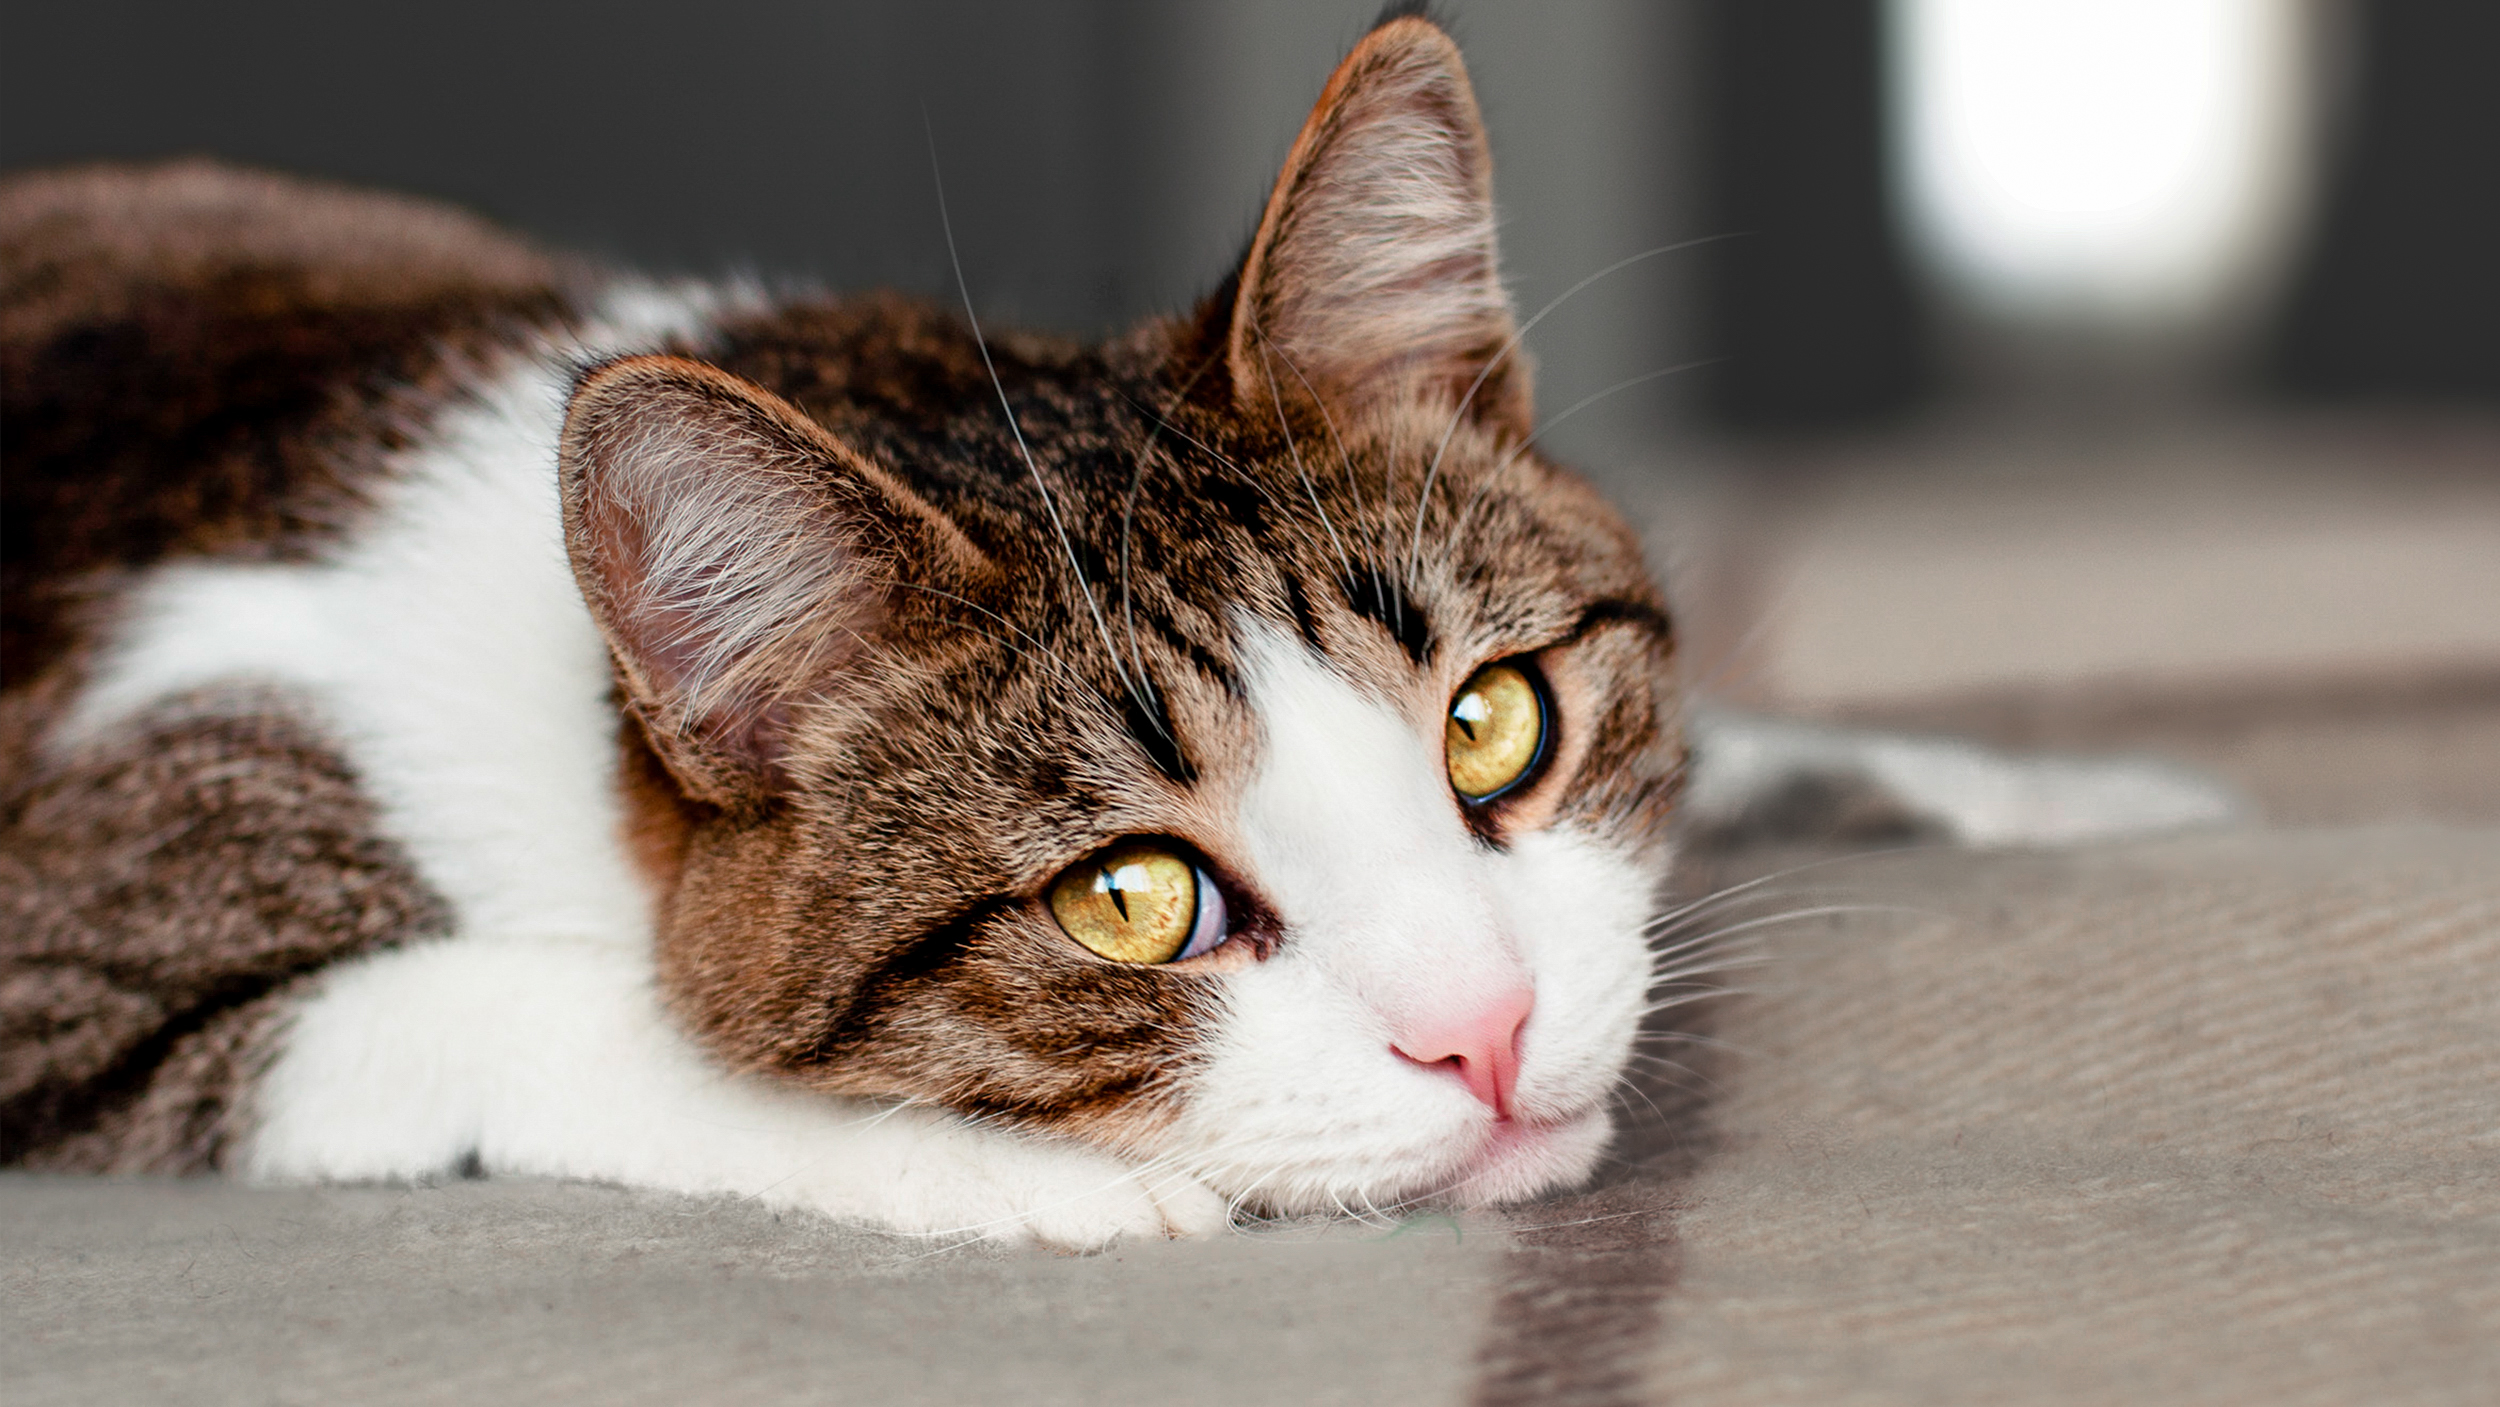 Adult cat lying down indoors on a carpet.